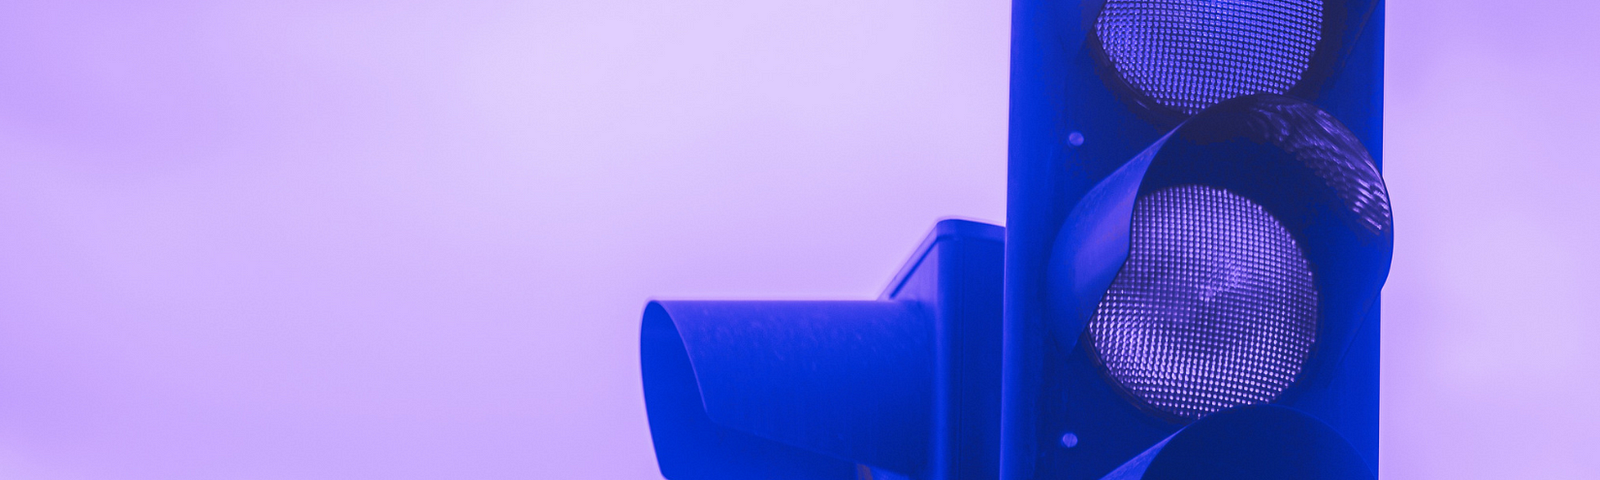 Image of a stoplight in purple wash, so that the red light appears blue.